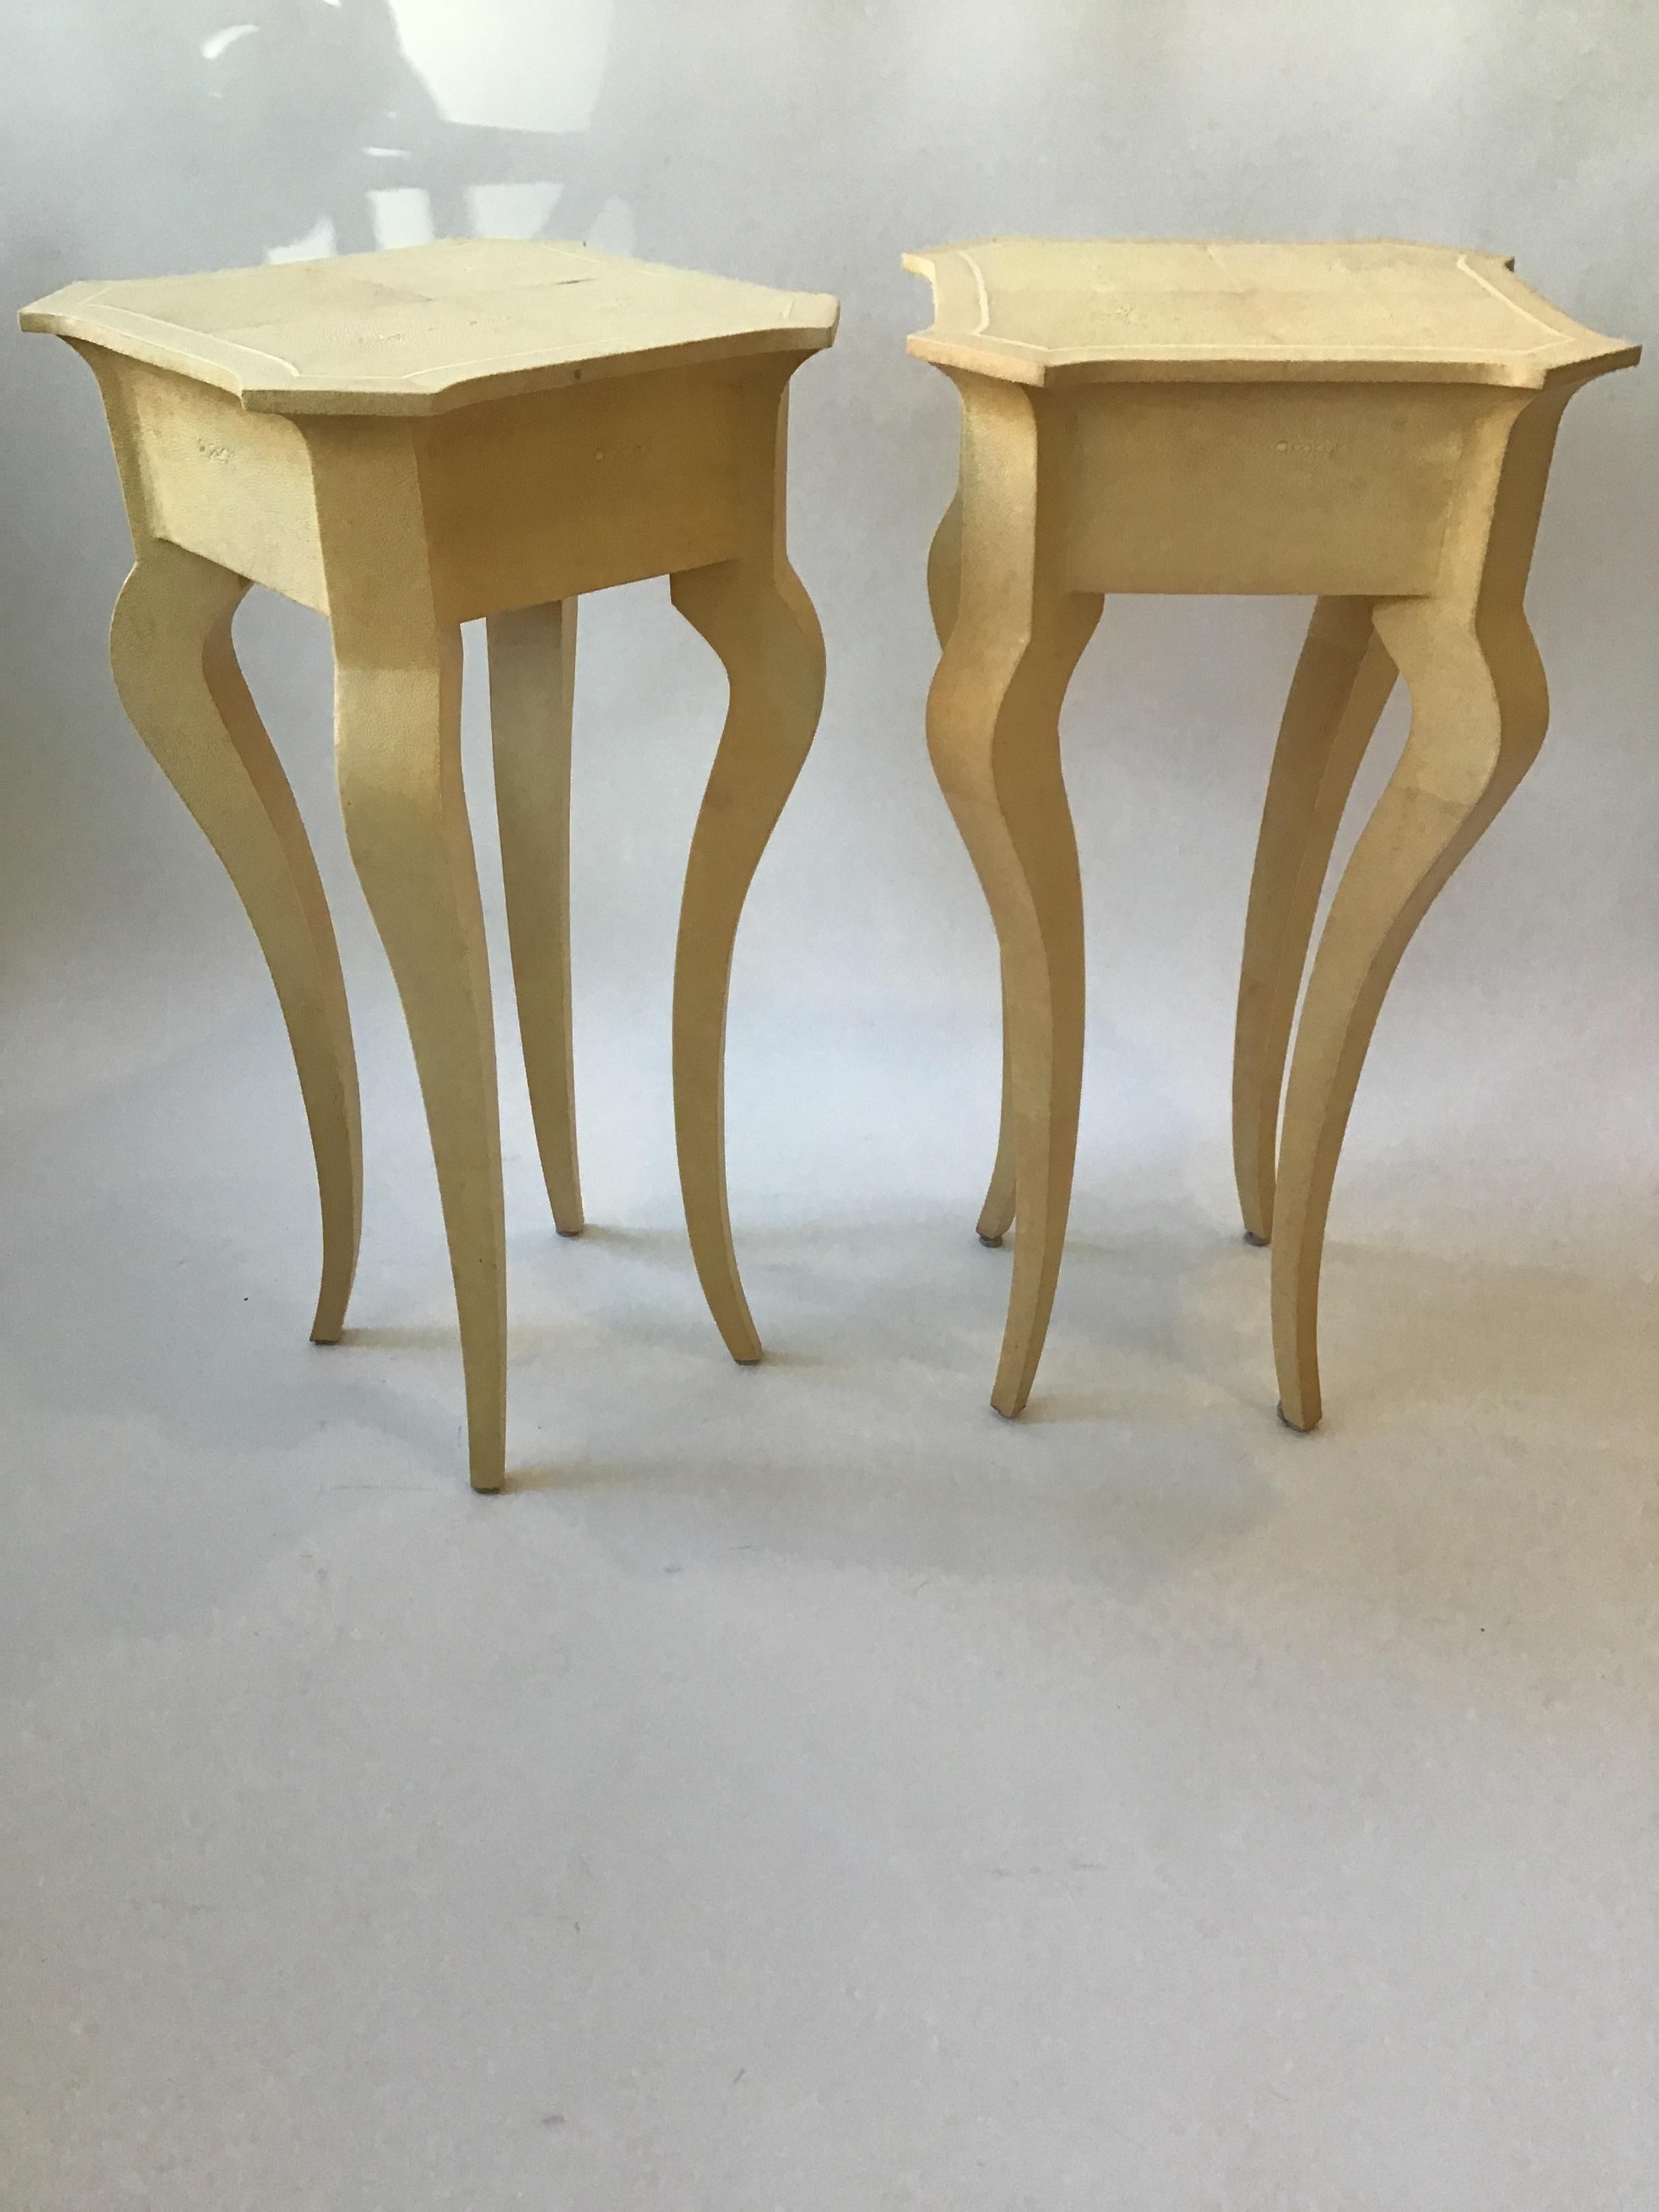 Pair of Shagreen side tables.
These tables can be shipped through UPS.